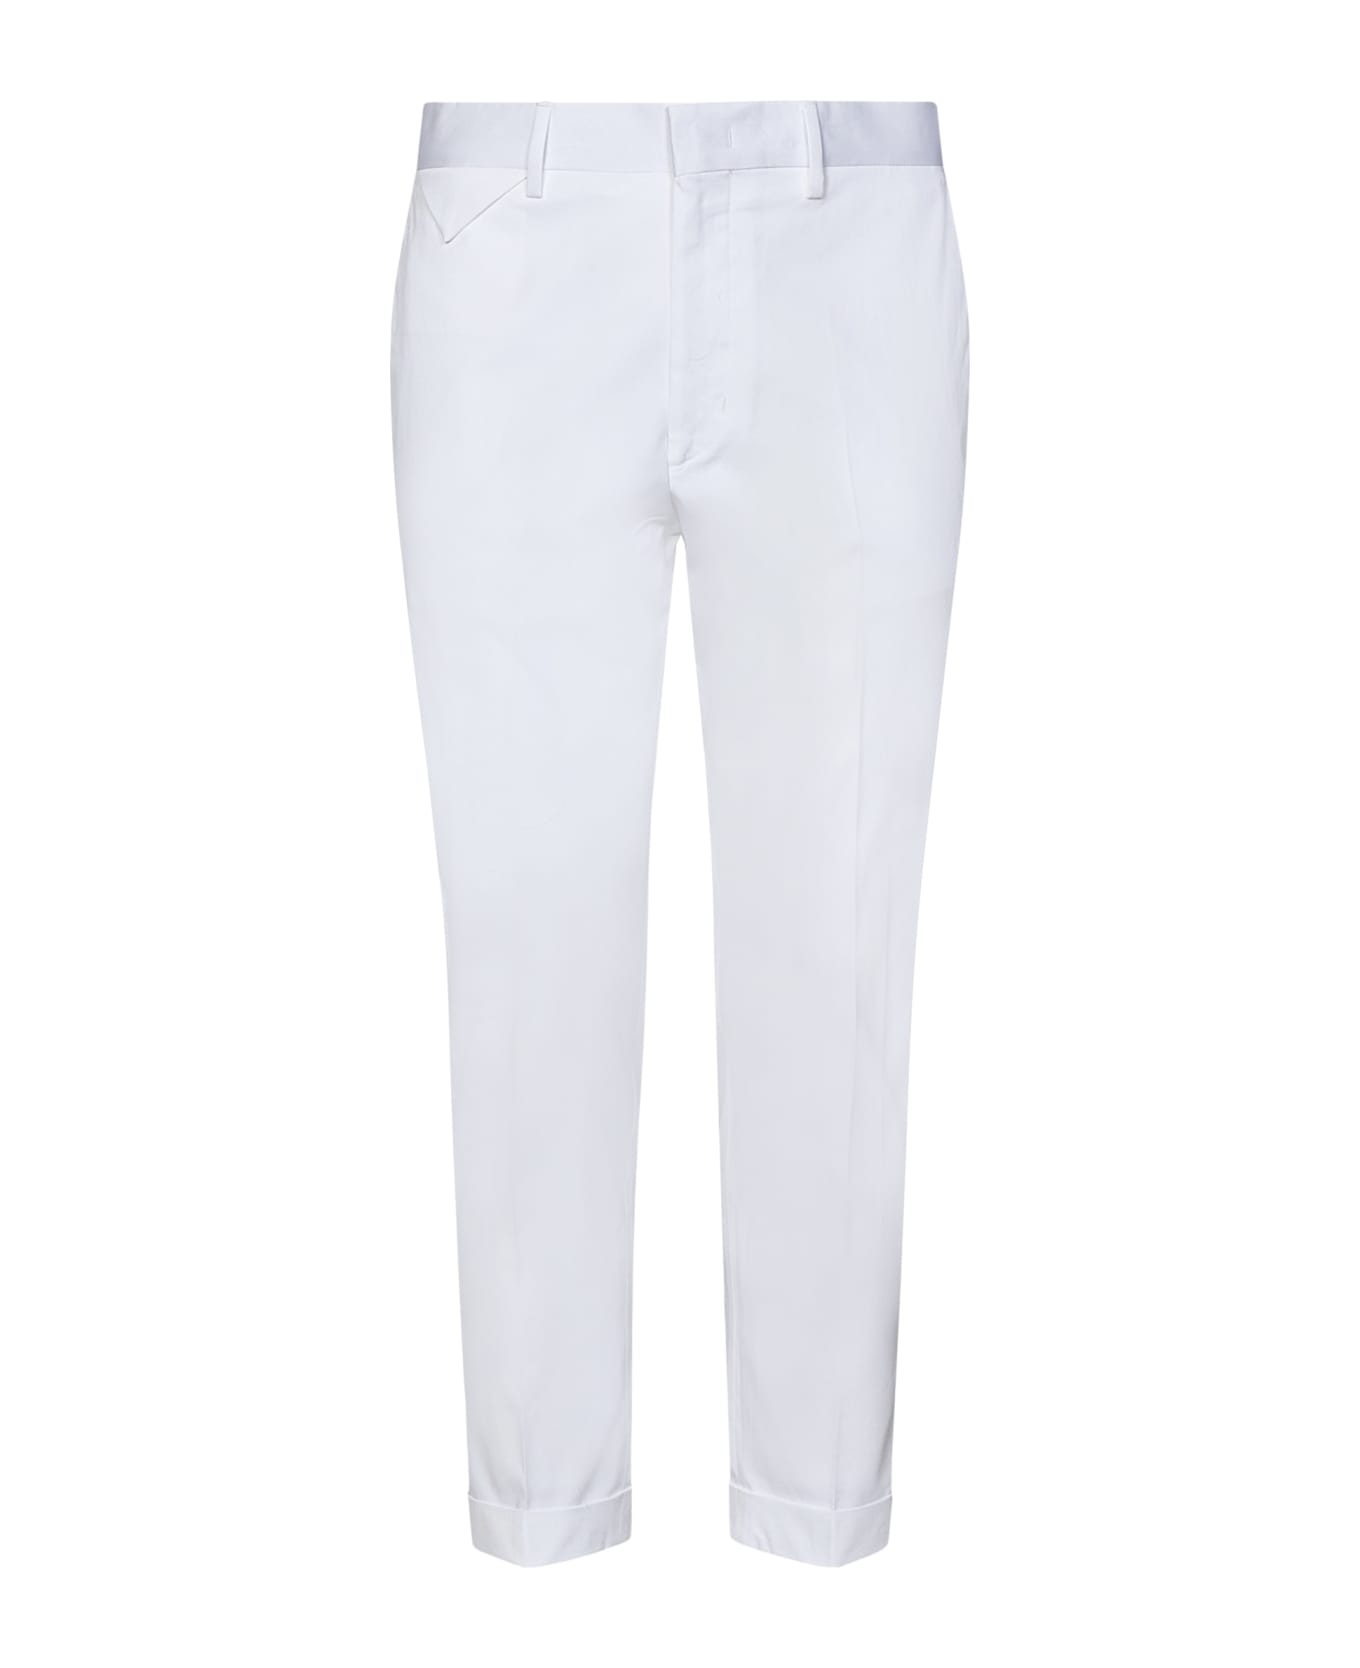 Low Brand Cooper T1.7 Trousers - White